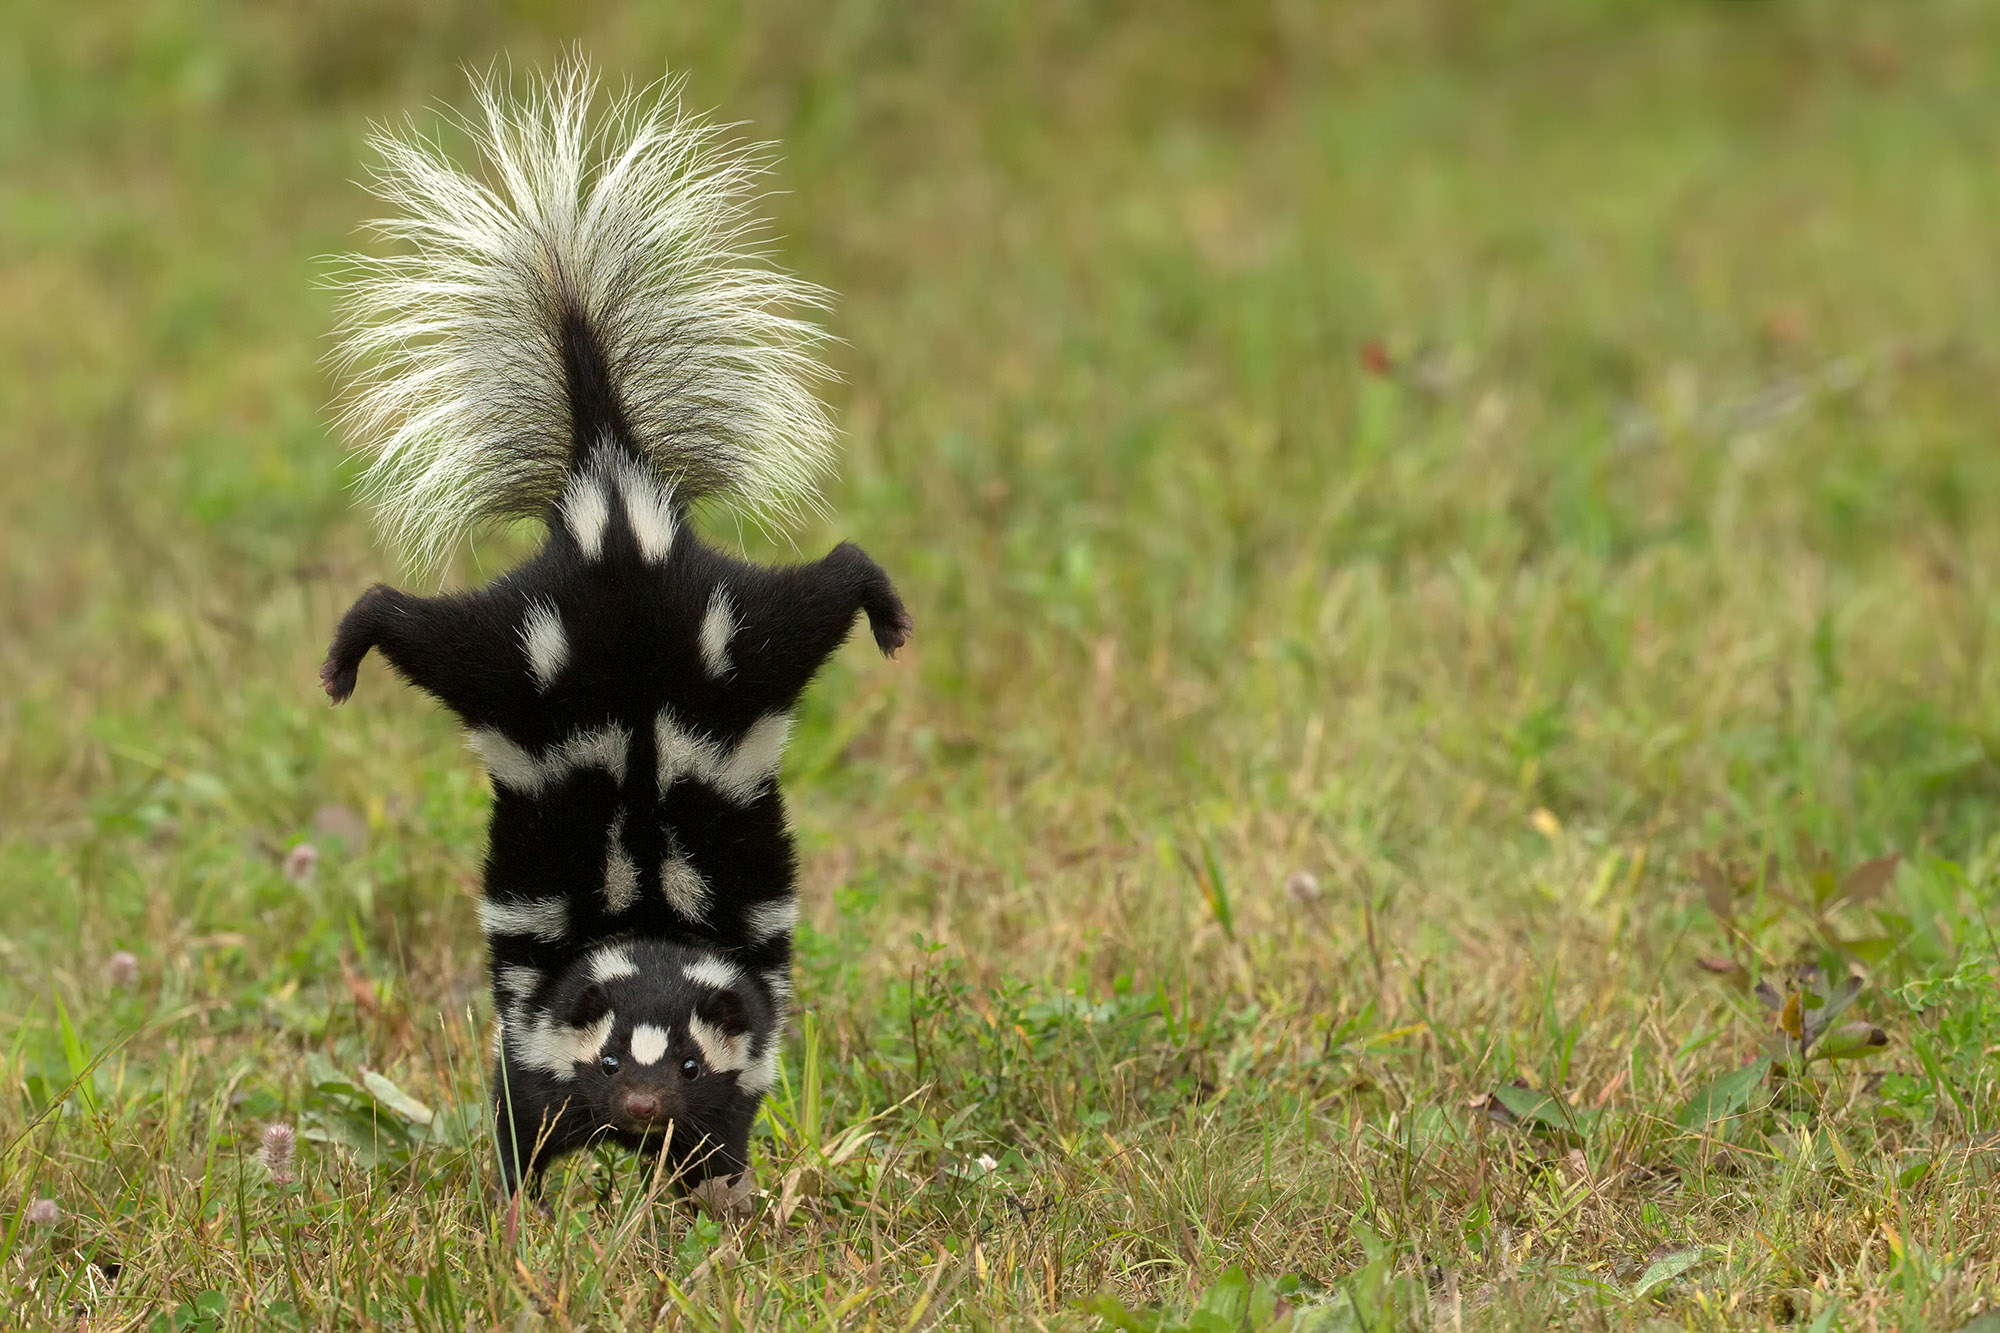 S spotted skunk standing on its front legs with its back legs and tail high in the air, against a grassy background.